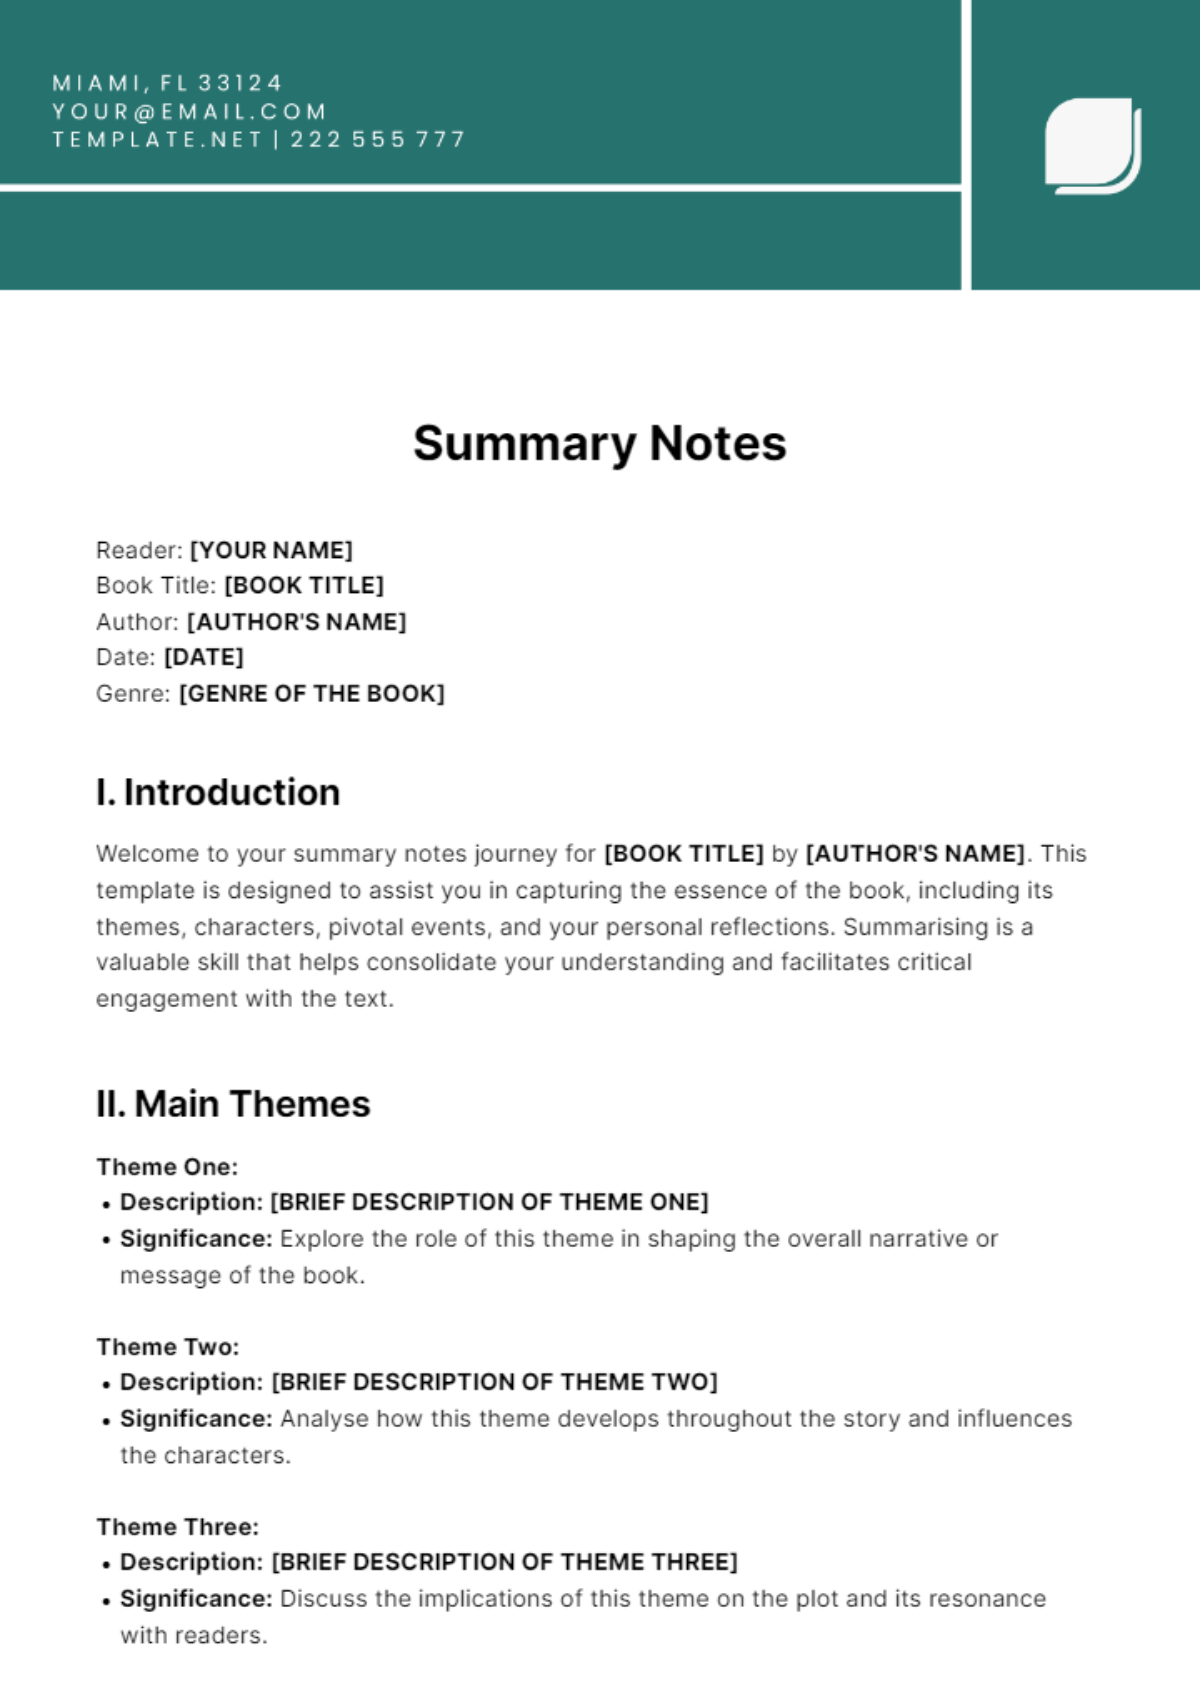 Free Summary Notes Template